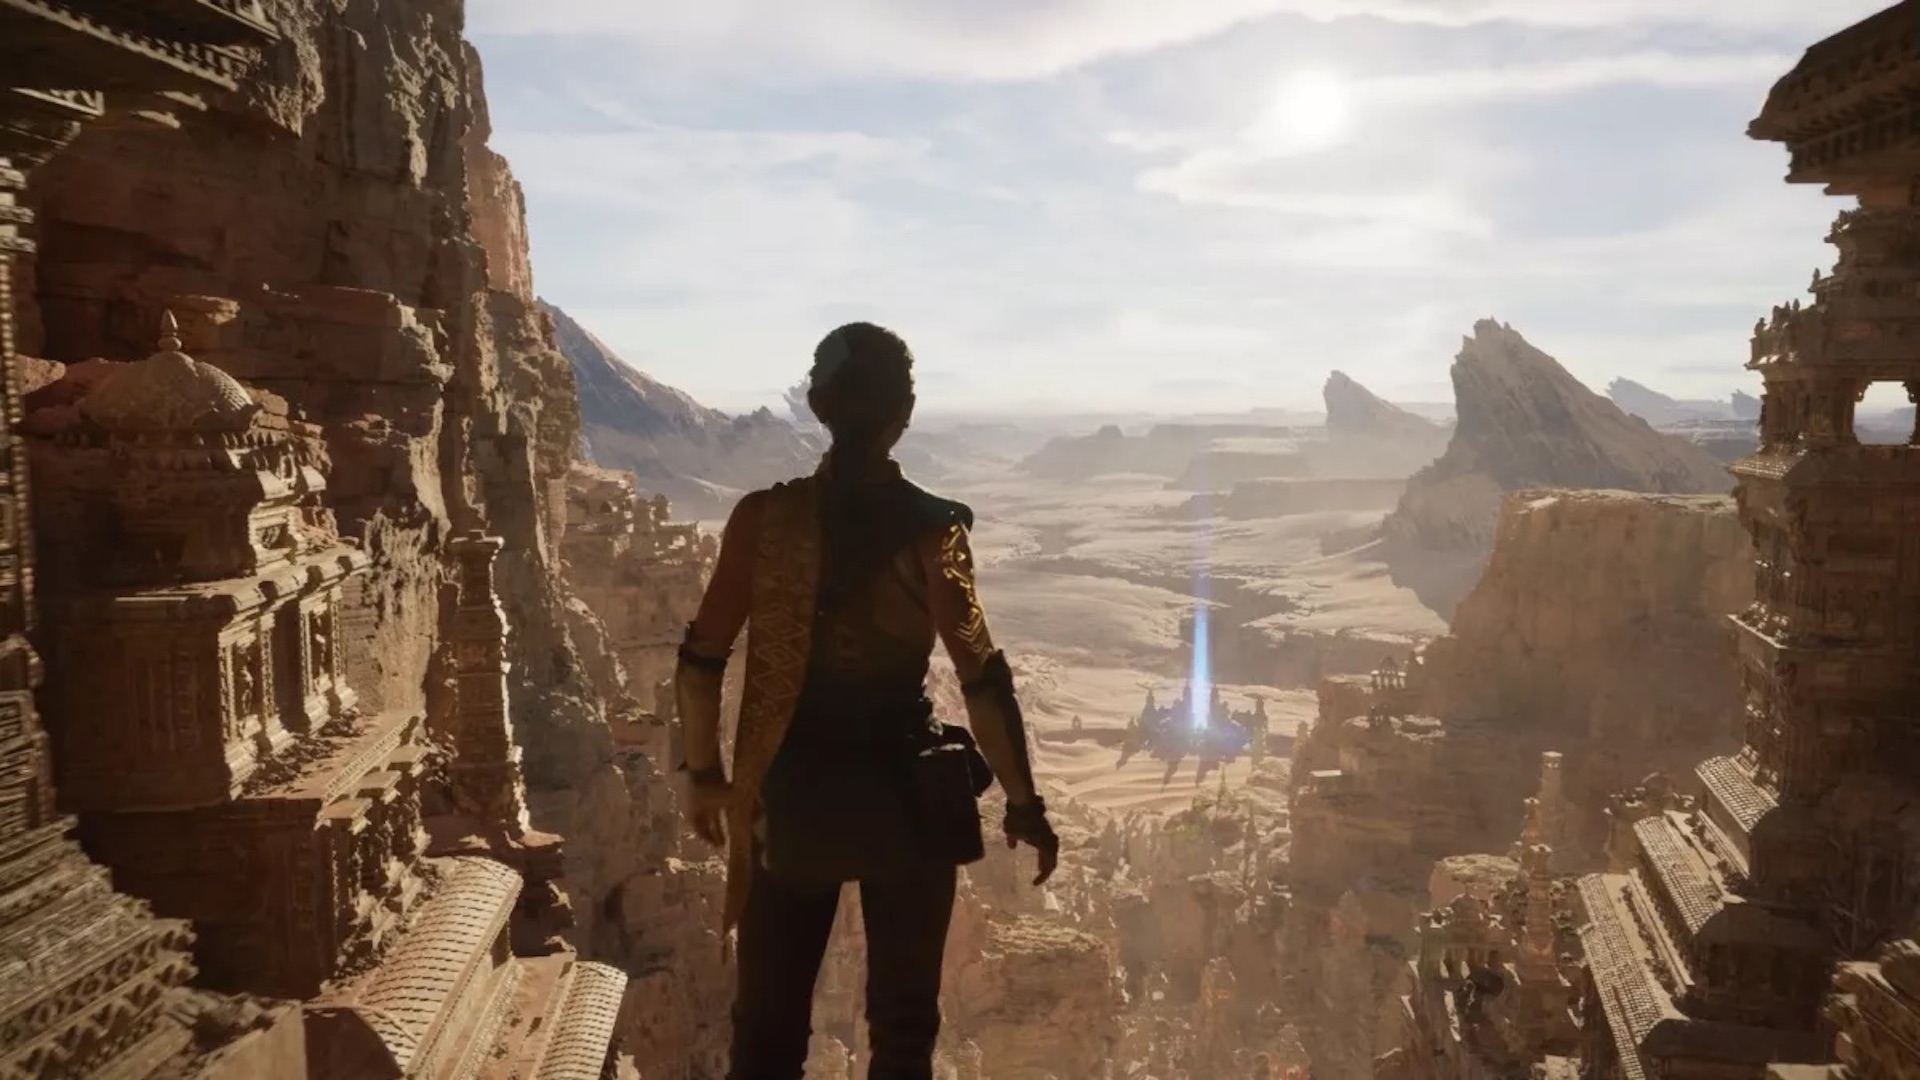 A shot from the Unreal Engine 5 tech demo. A woman looks out over a desert landscape